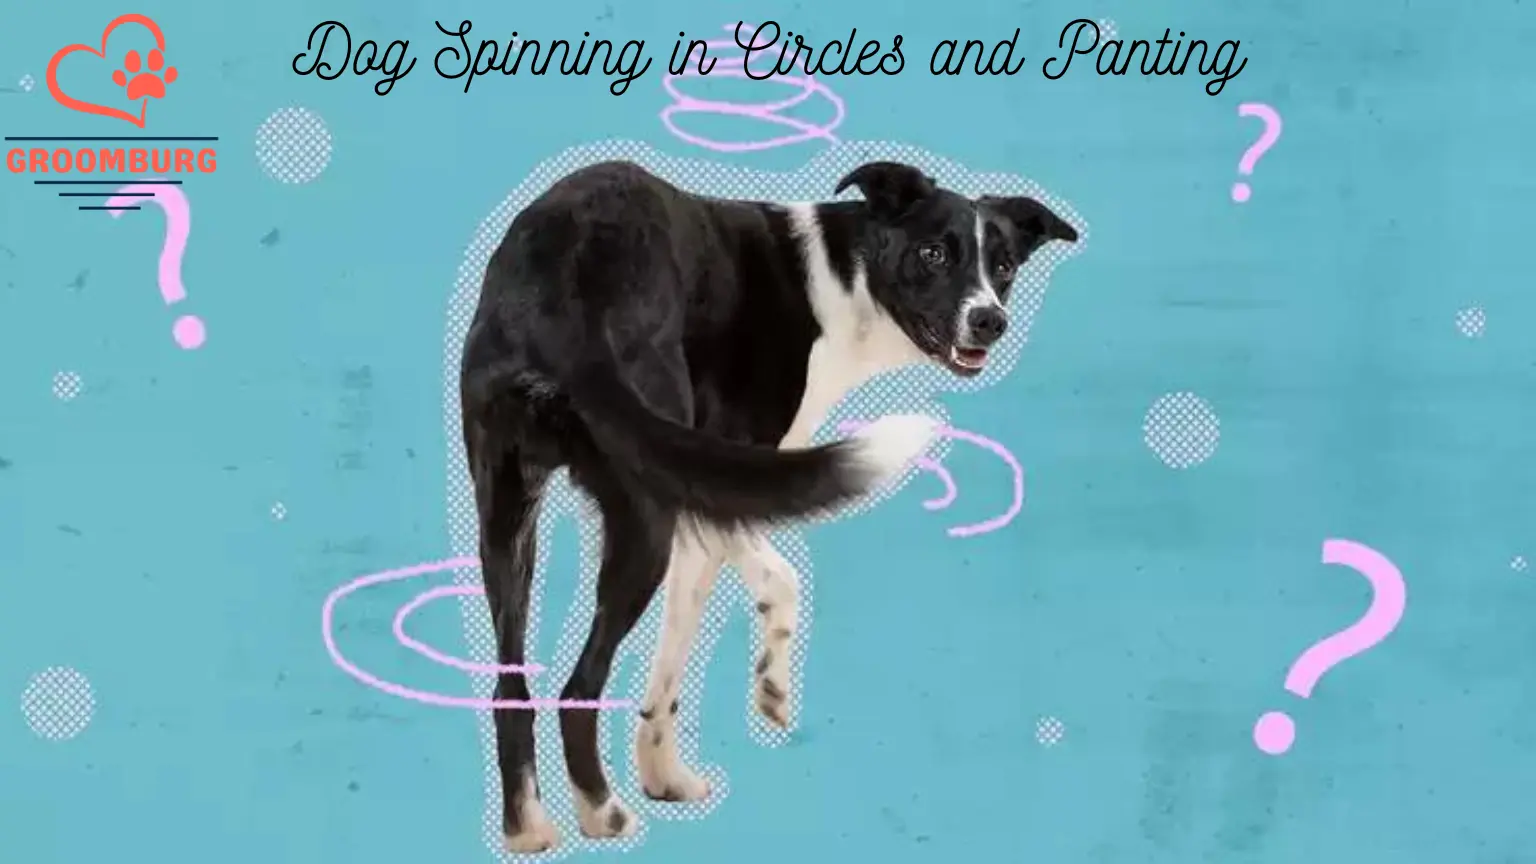 Dog Spinning in Circles and Panting